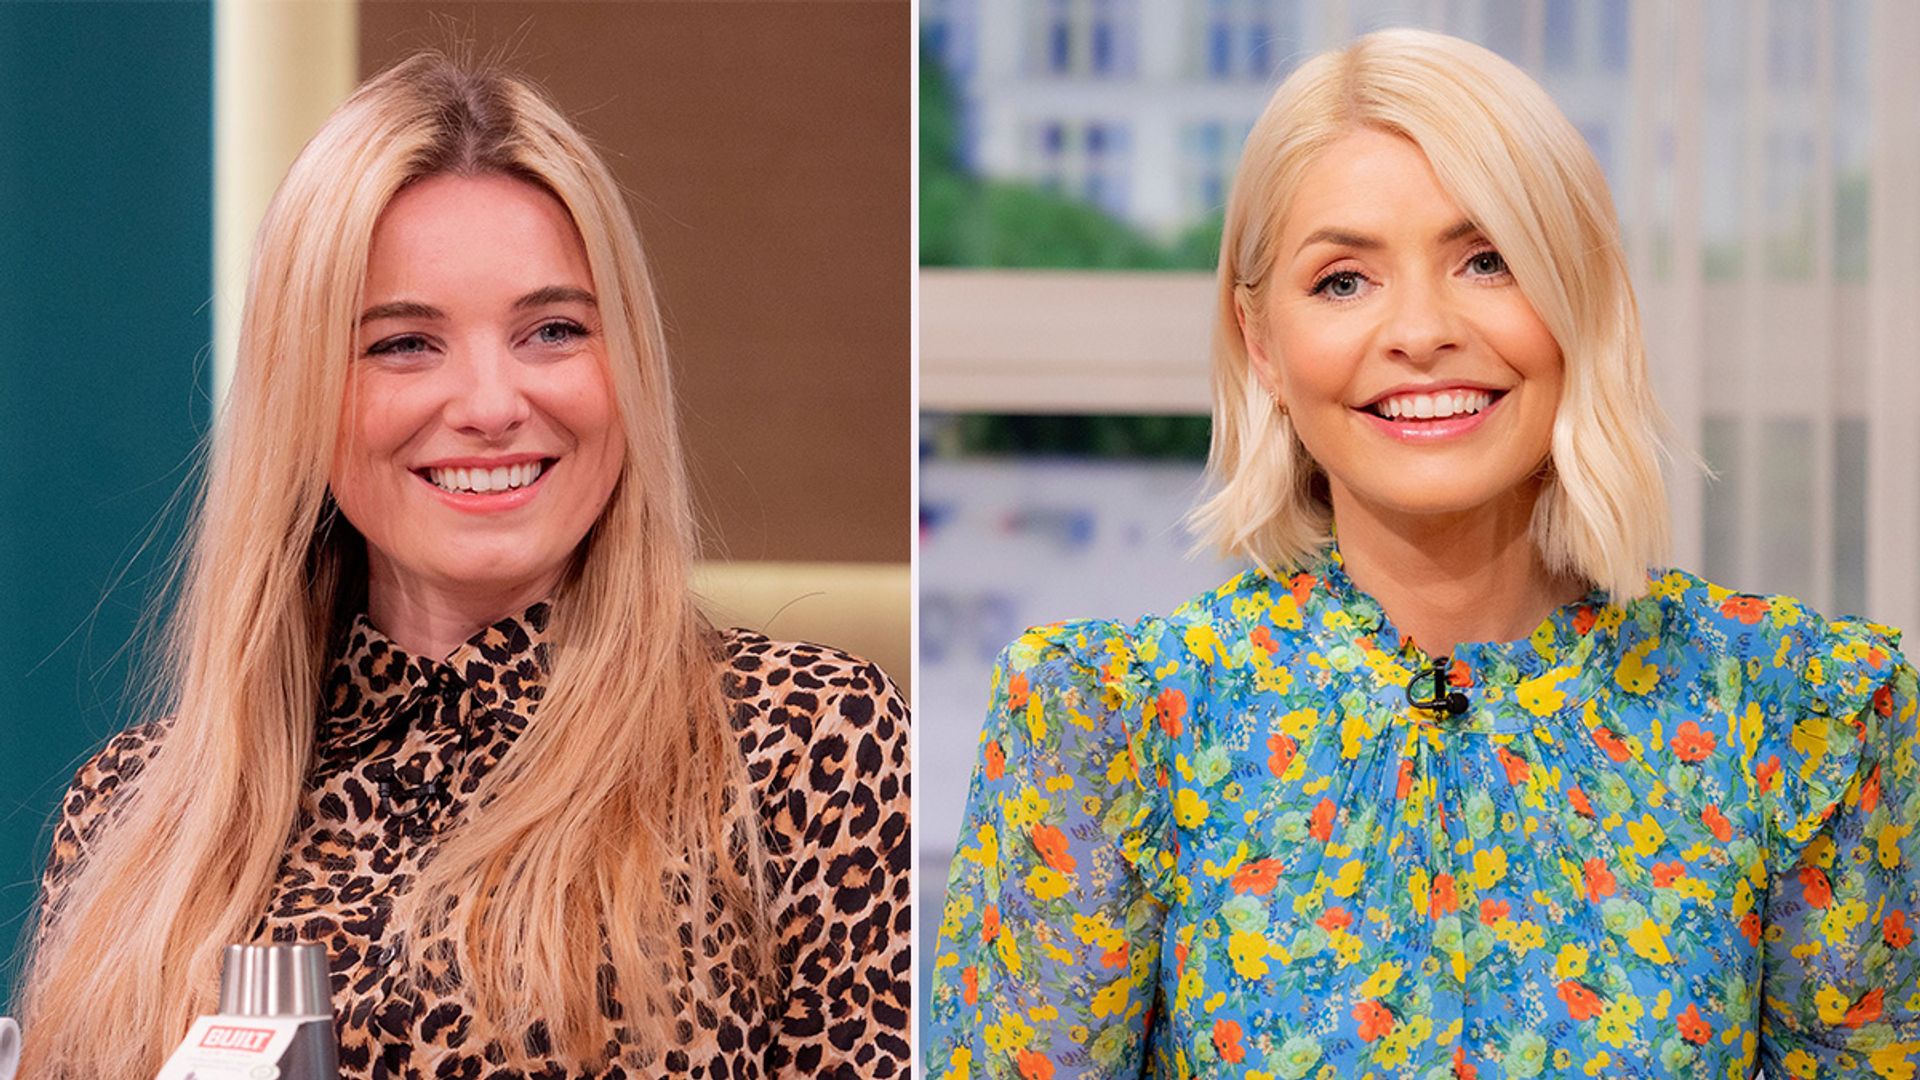 Sian Welby, Holly Willoughby split image 